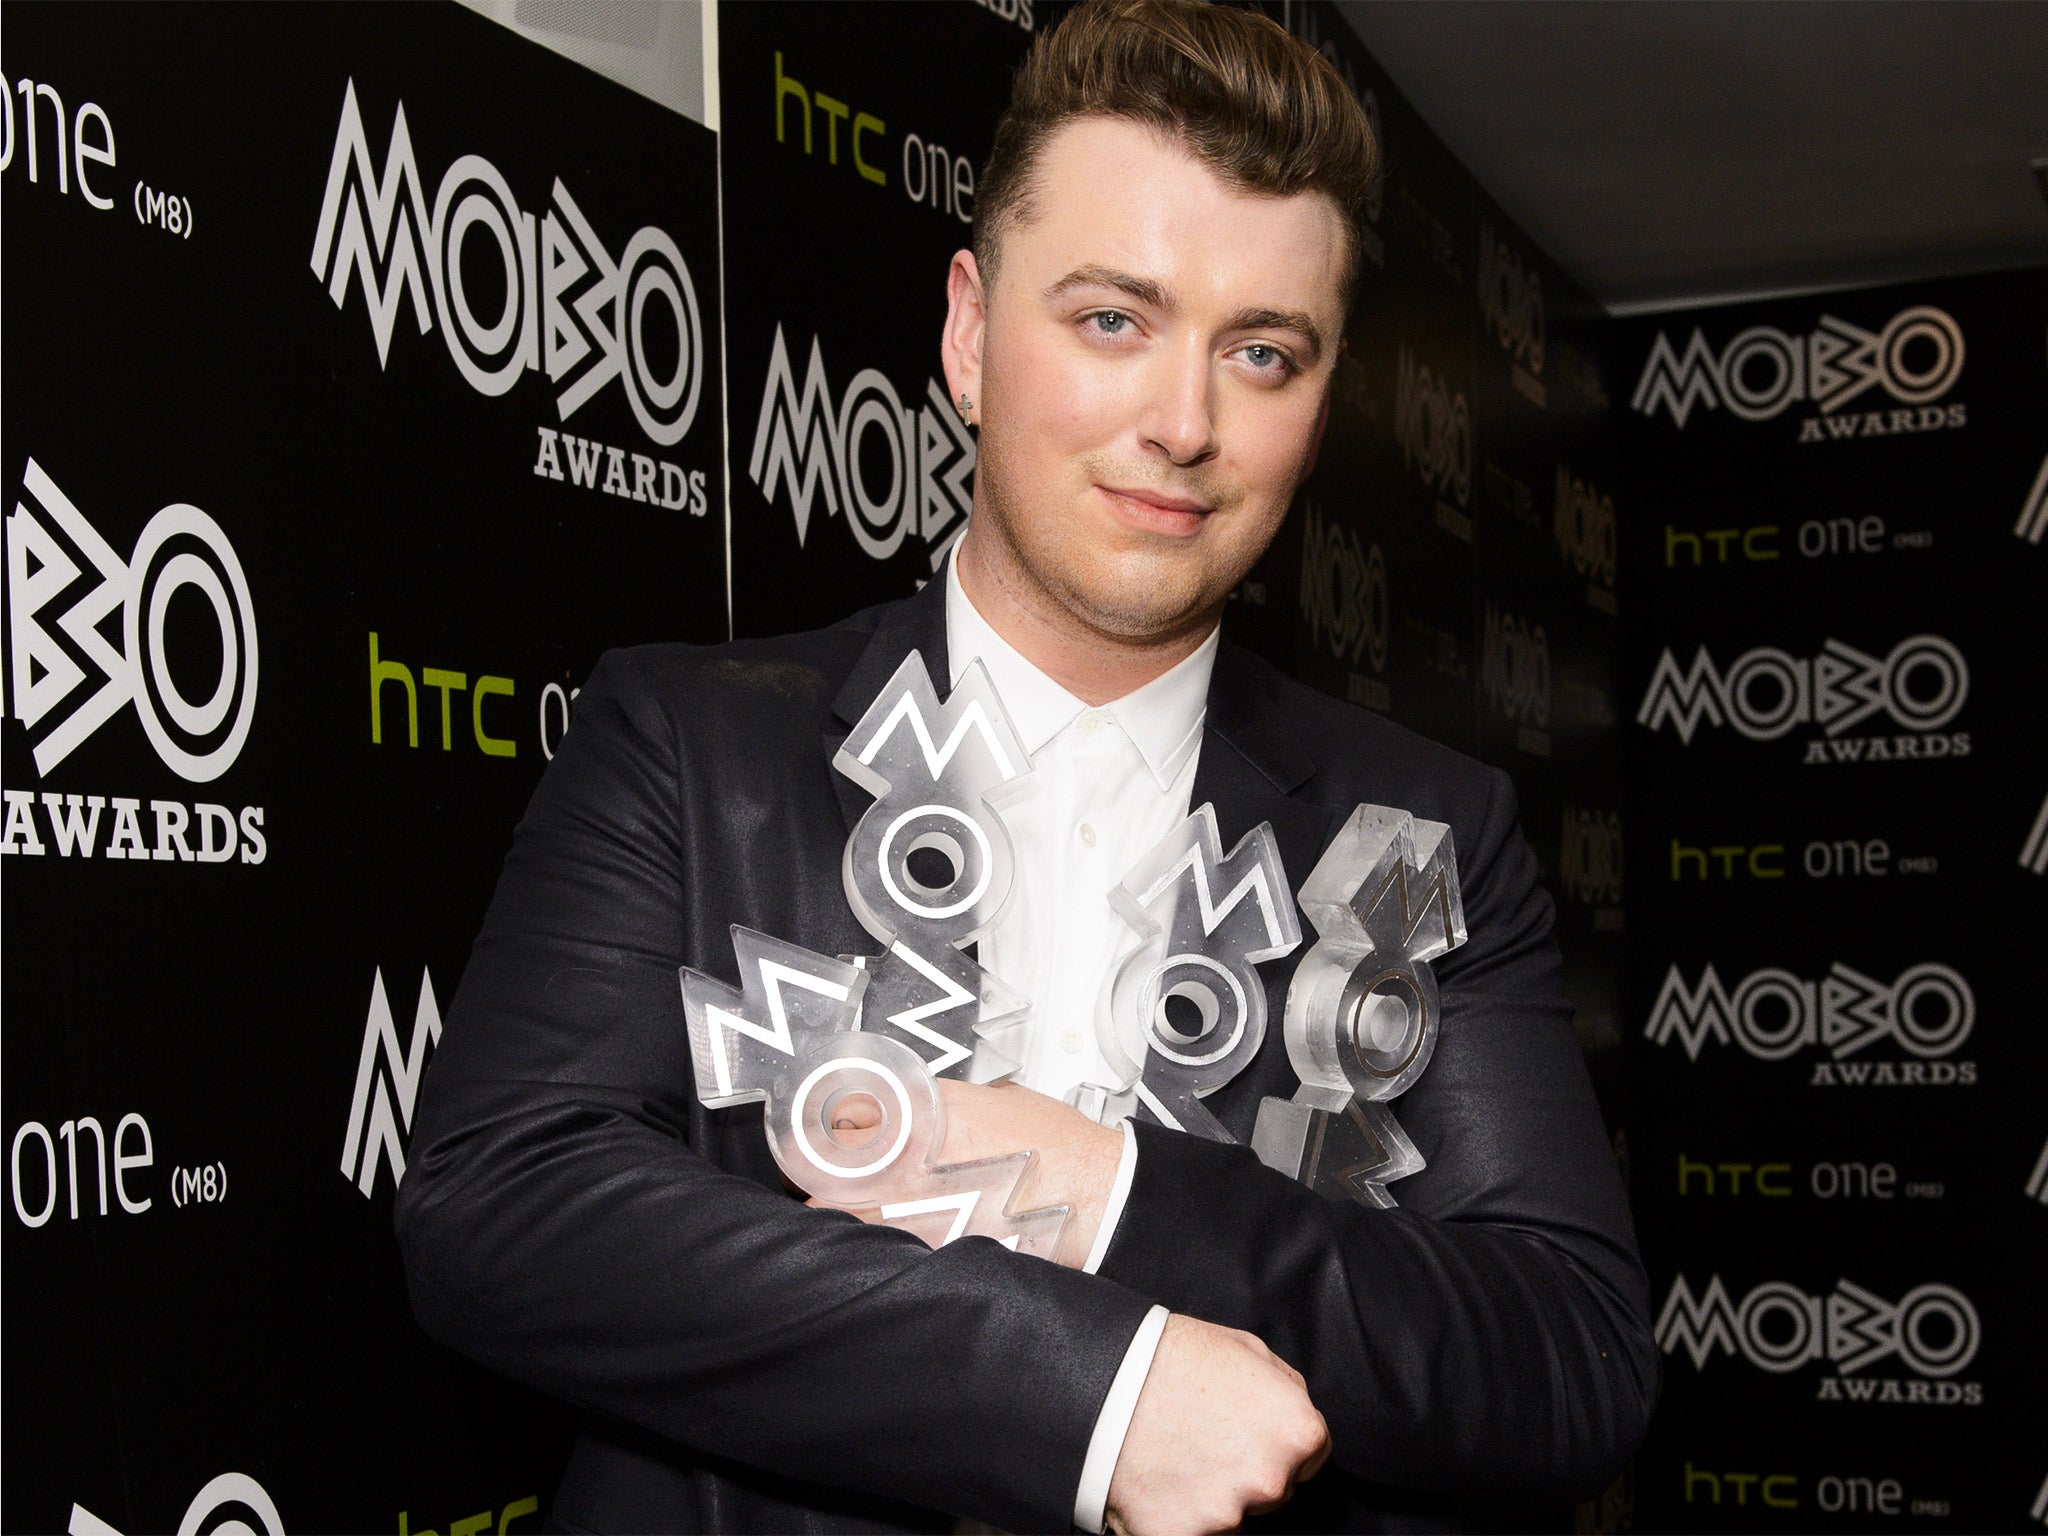 MOBO Awards 2014: Sam Smith sweeps the board to take home ...